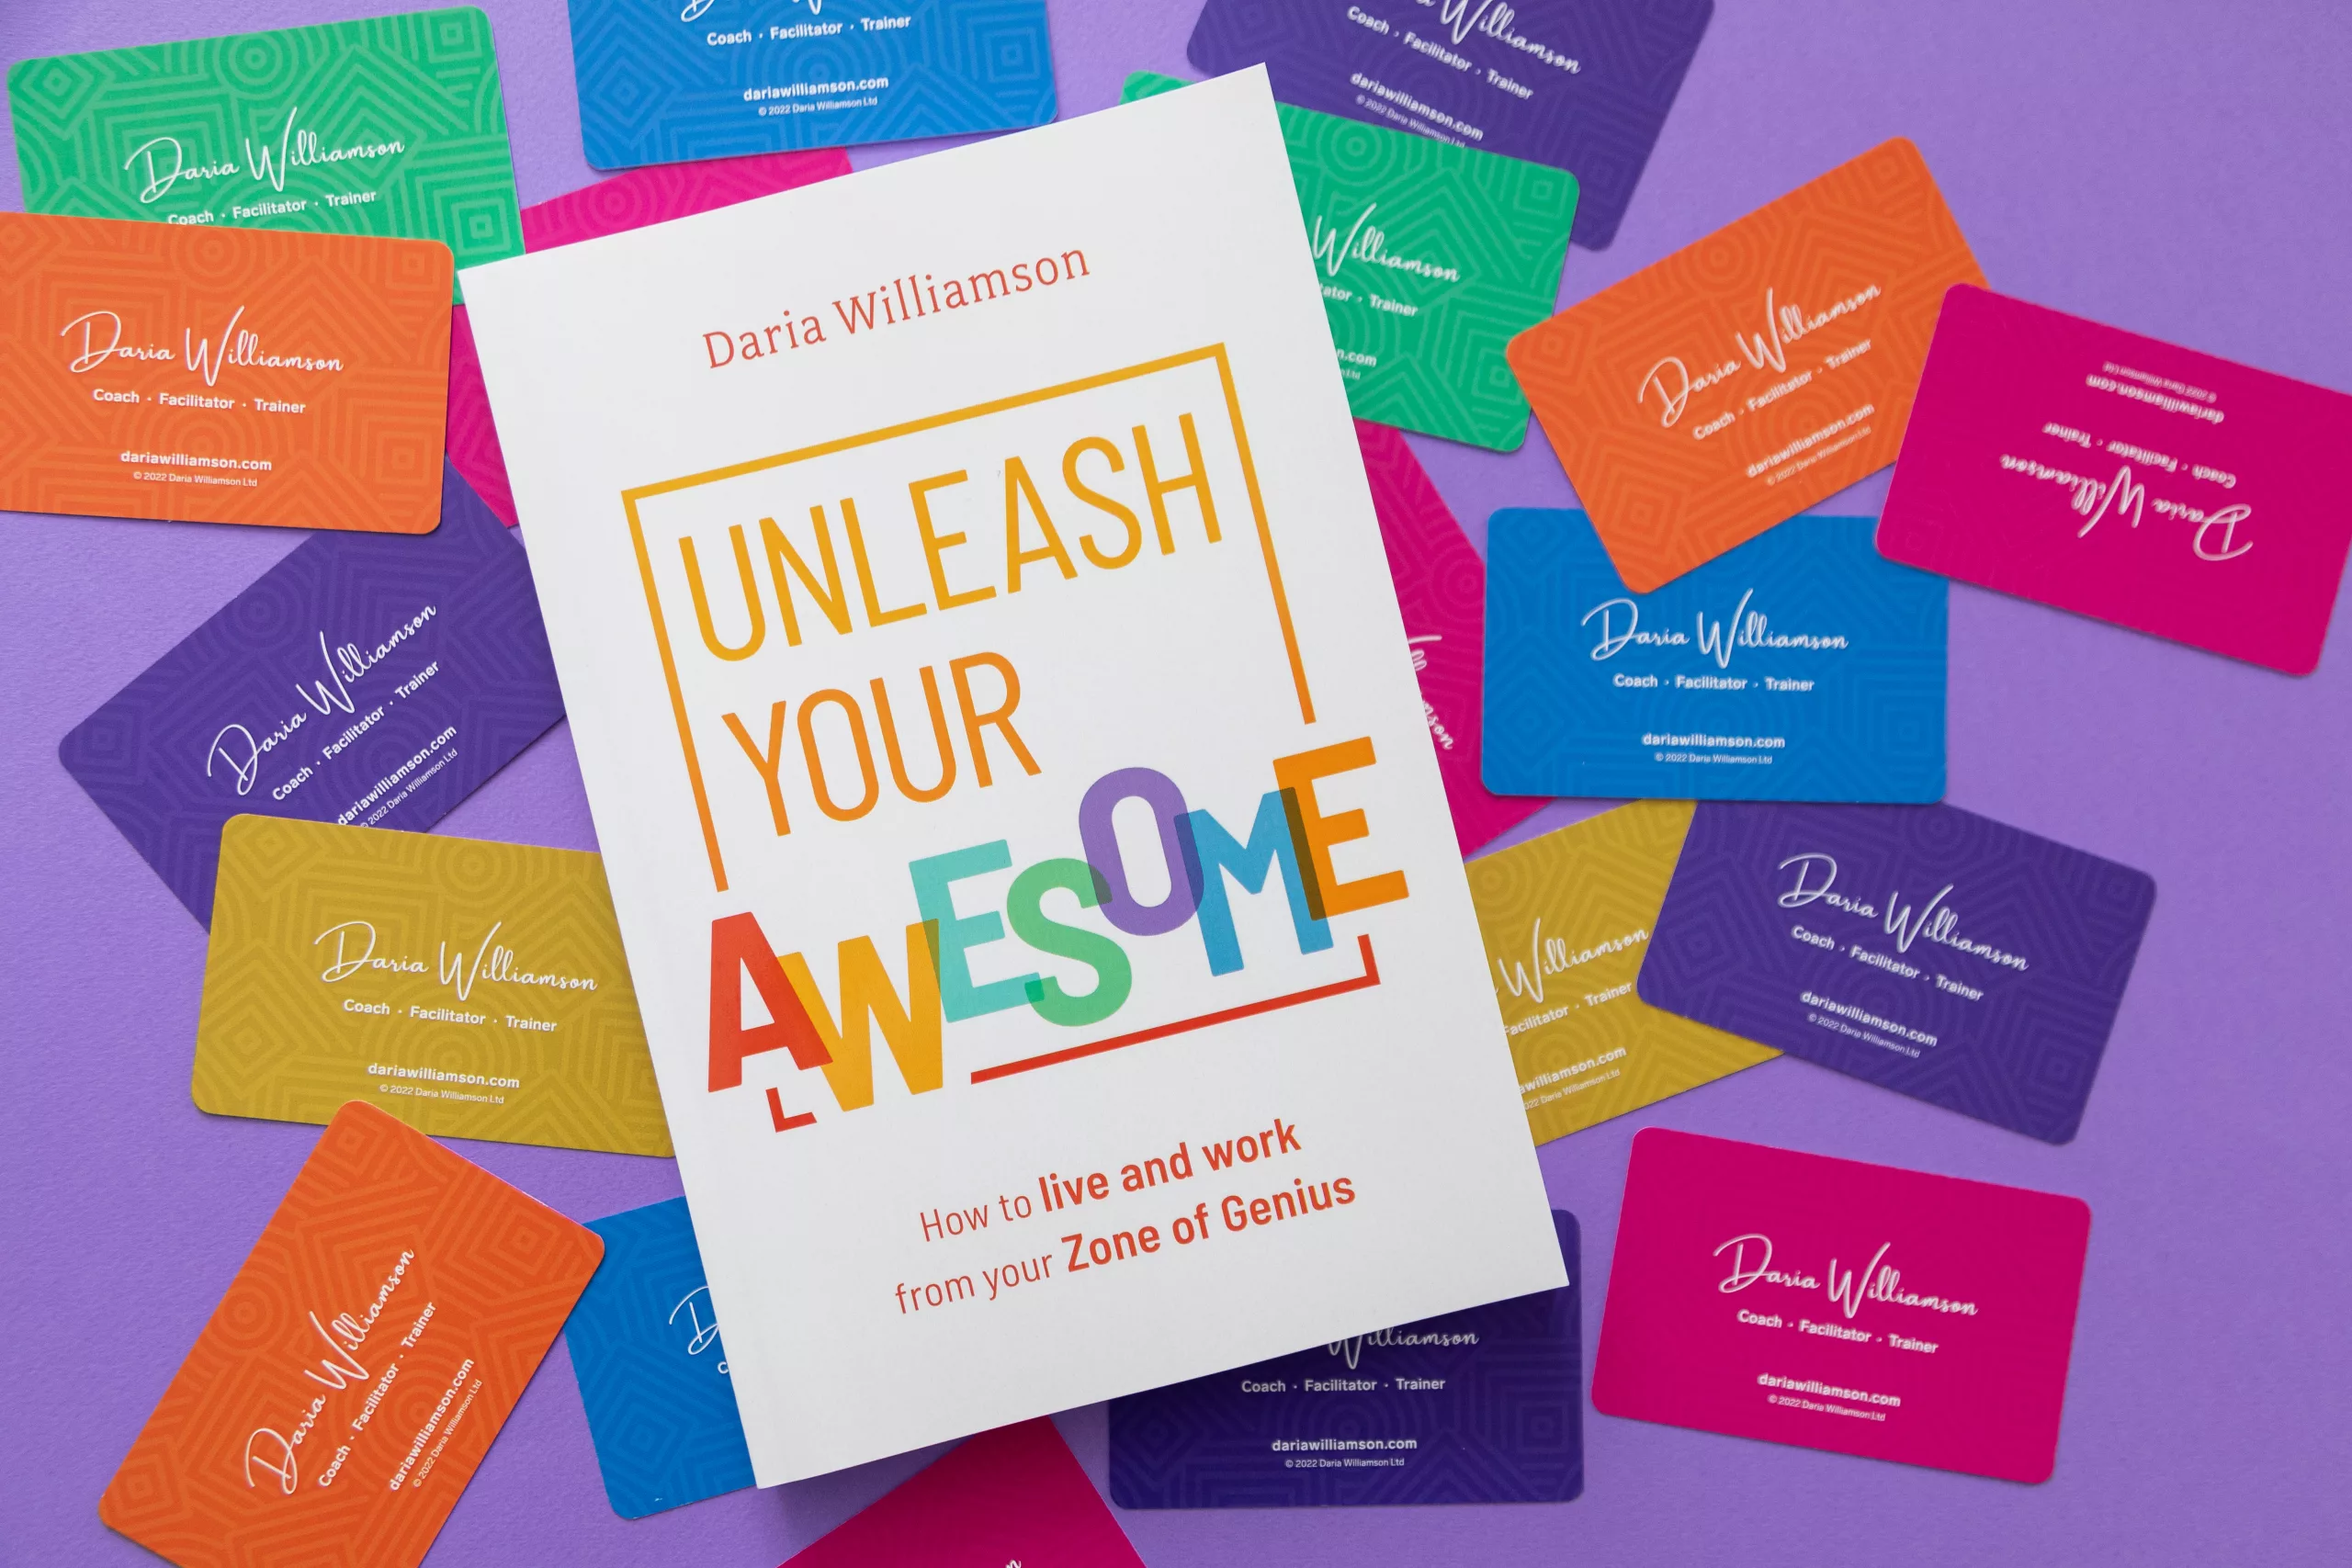 A copy of the book 'Unleash Your Awesome' lies atop a sample of The Strengths Deck cards, which have been scattered face-down on top of a purple background, so that the colourful backs of the cards are visible.